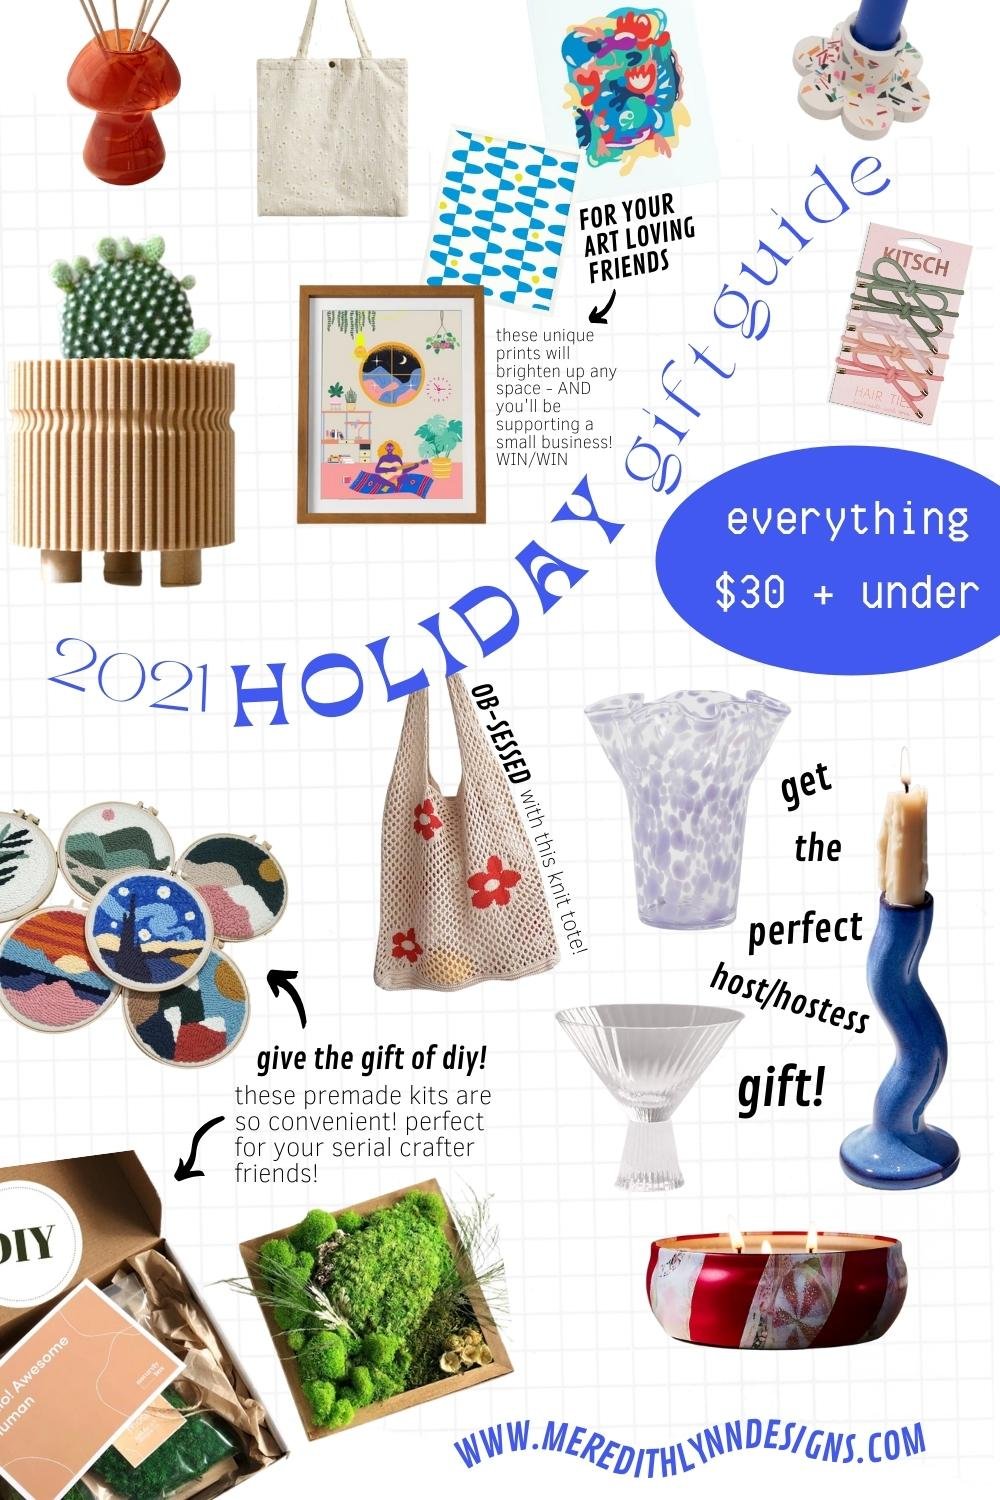 Top 10 Gifts Under $30 for Christmas